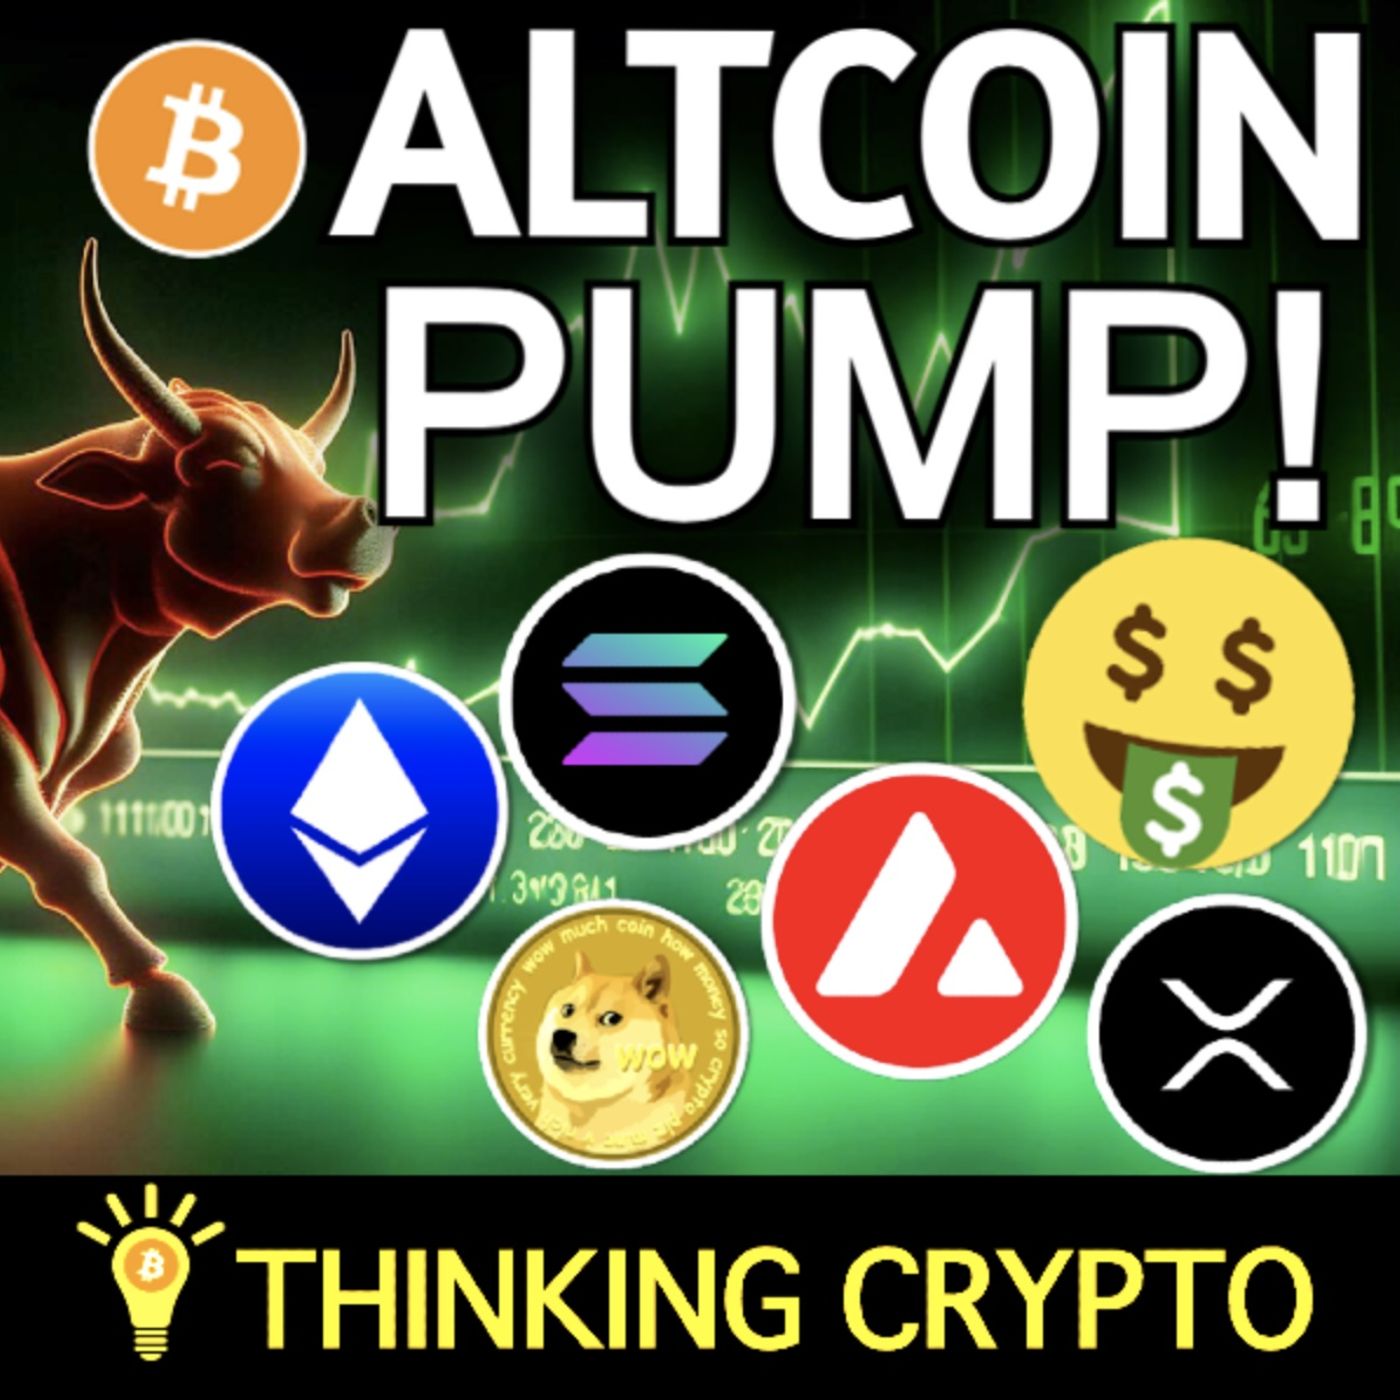 🚨ALTCOINS TO RALLY AS BITCOIN DOMINANCE FALLS? MEMECOINS ARE GOOD!?